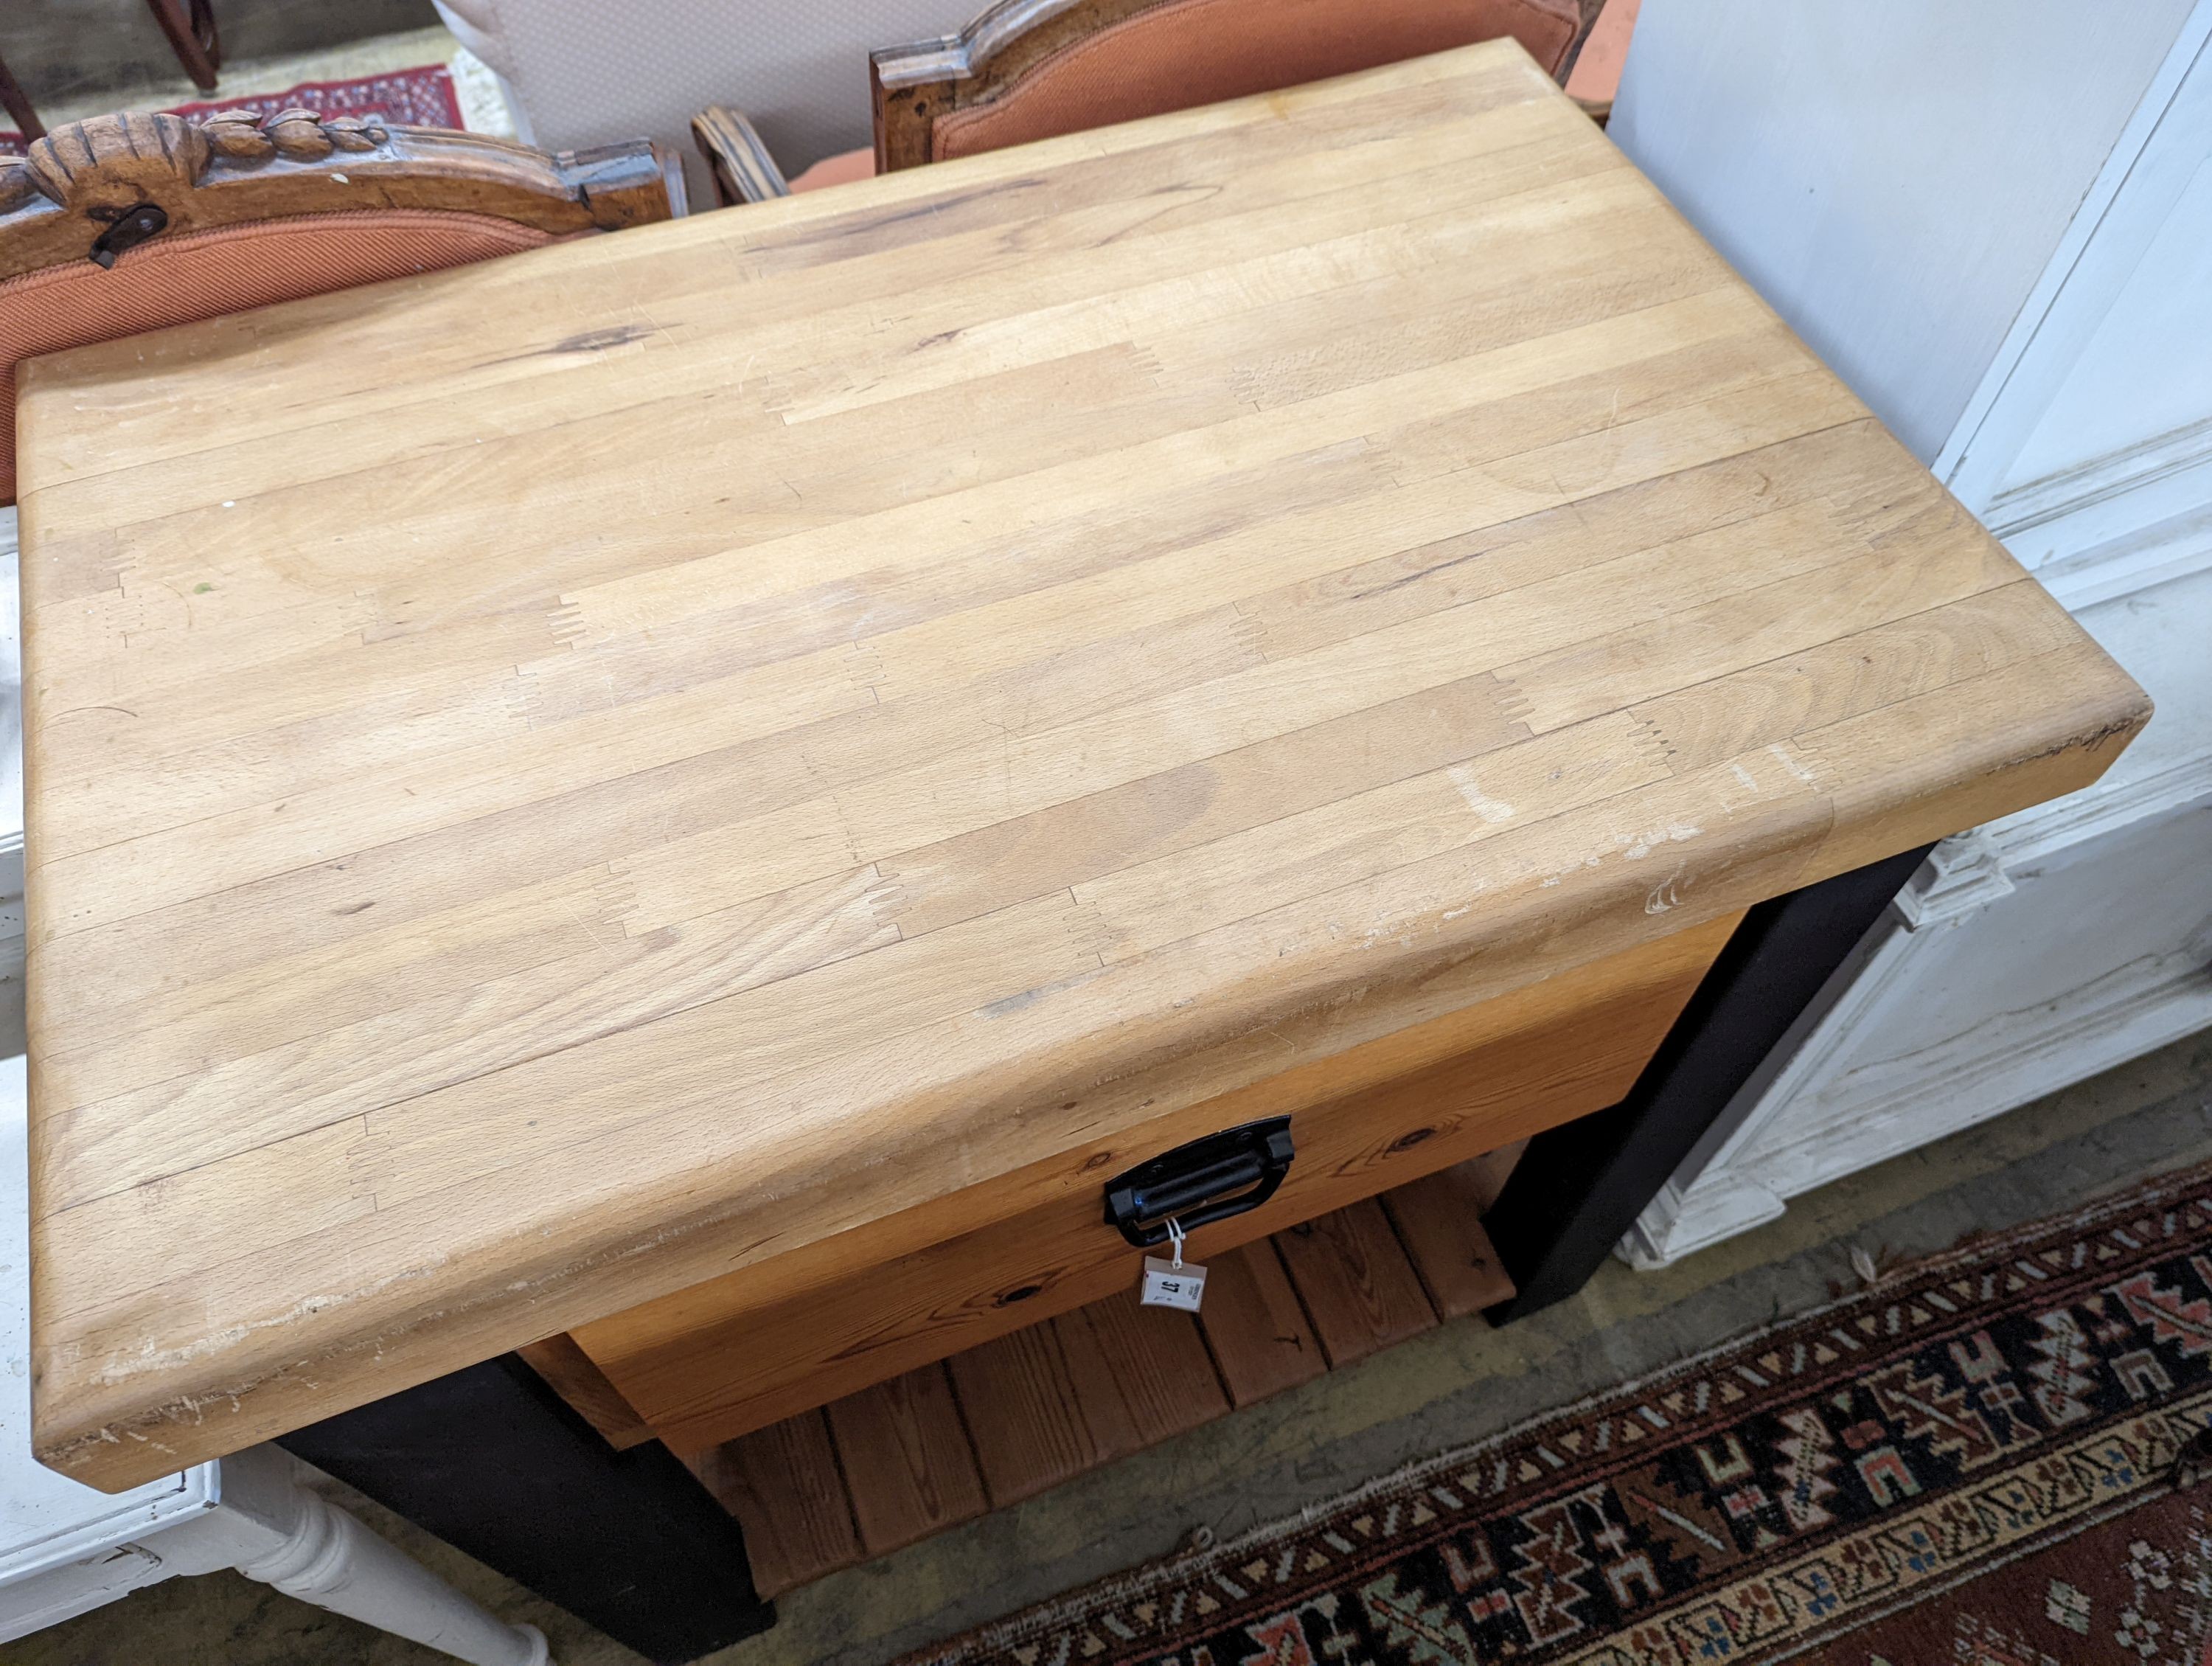 A professional butcher’s block in solid beech and pine, length 90cm, depth 60cm, height 90cm